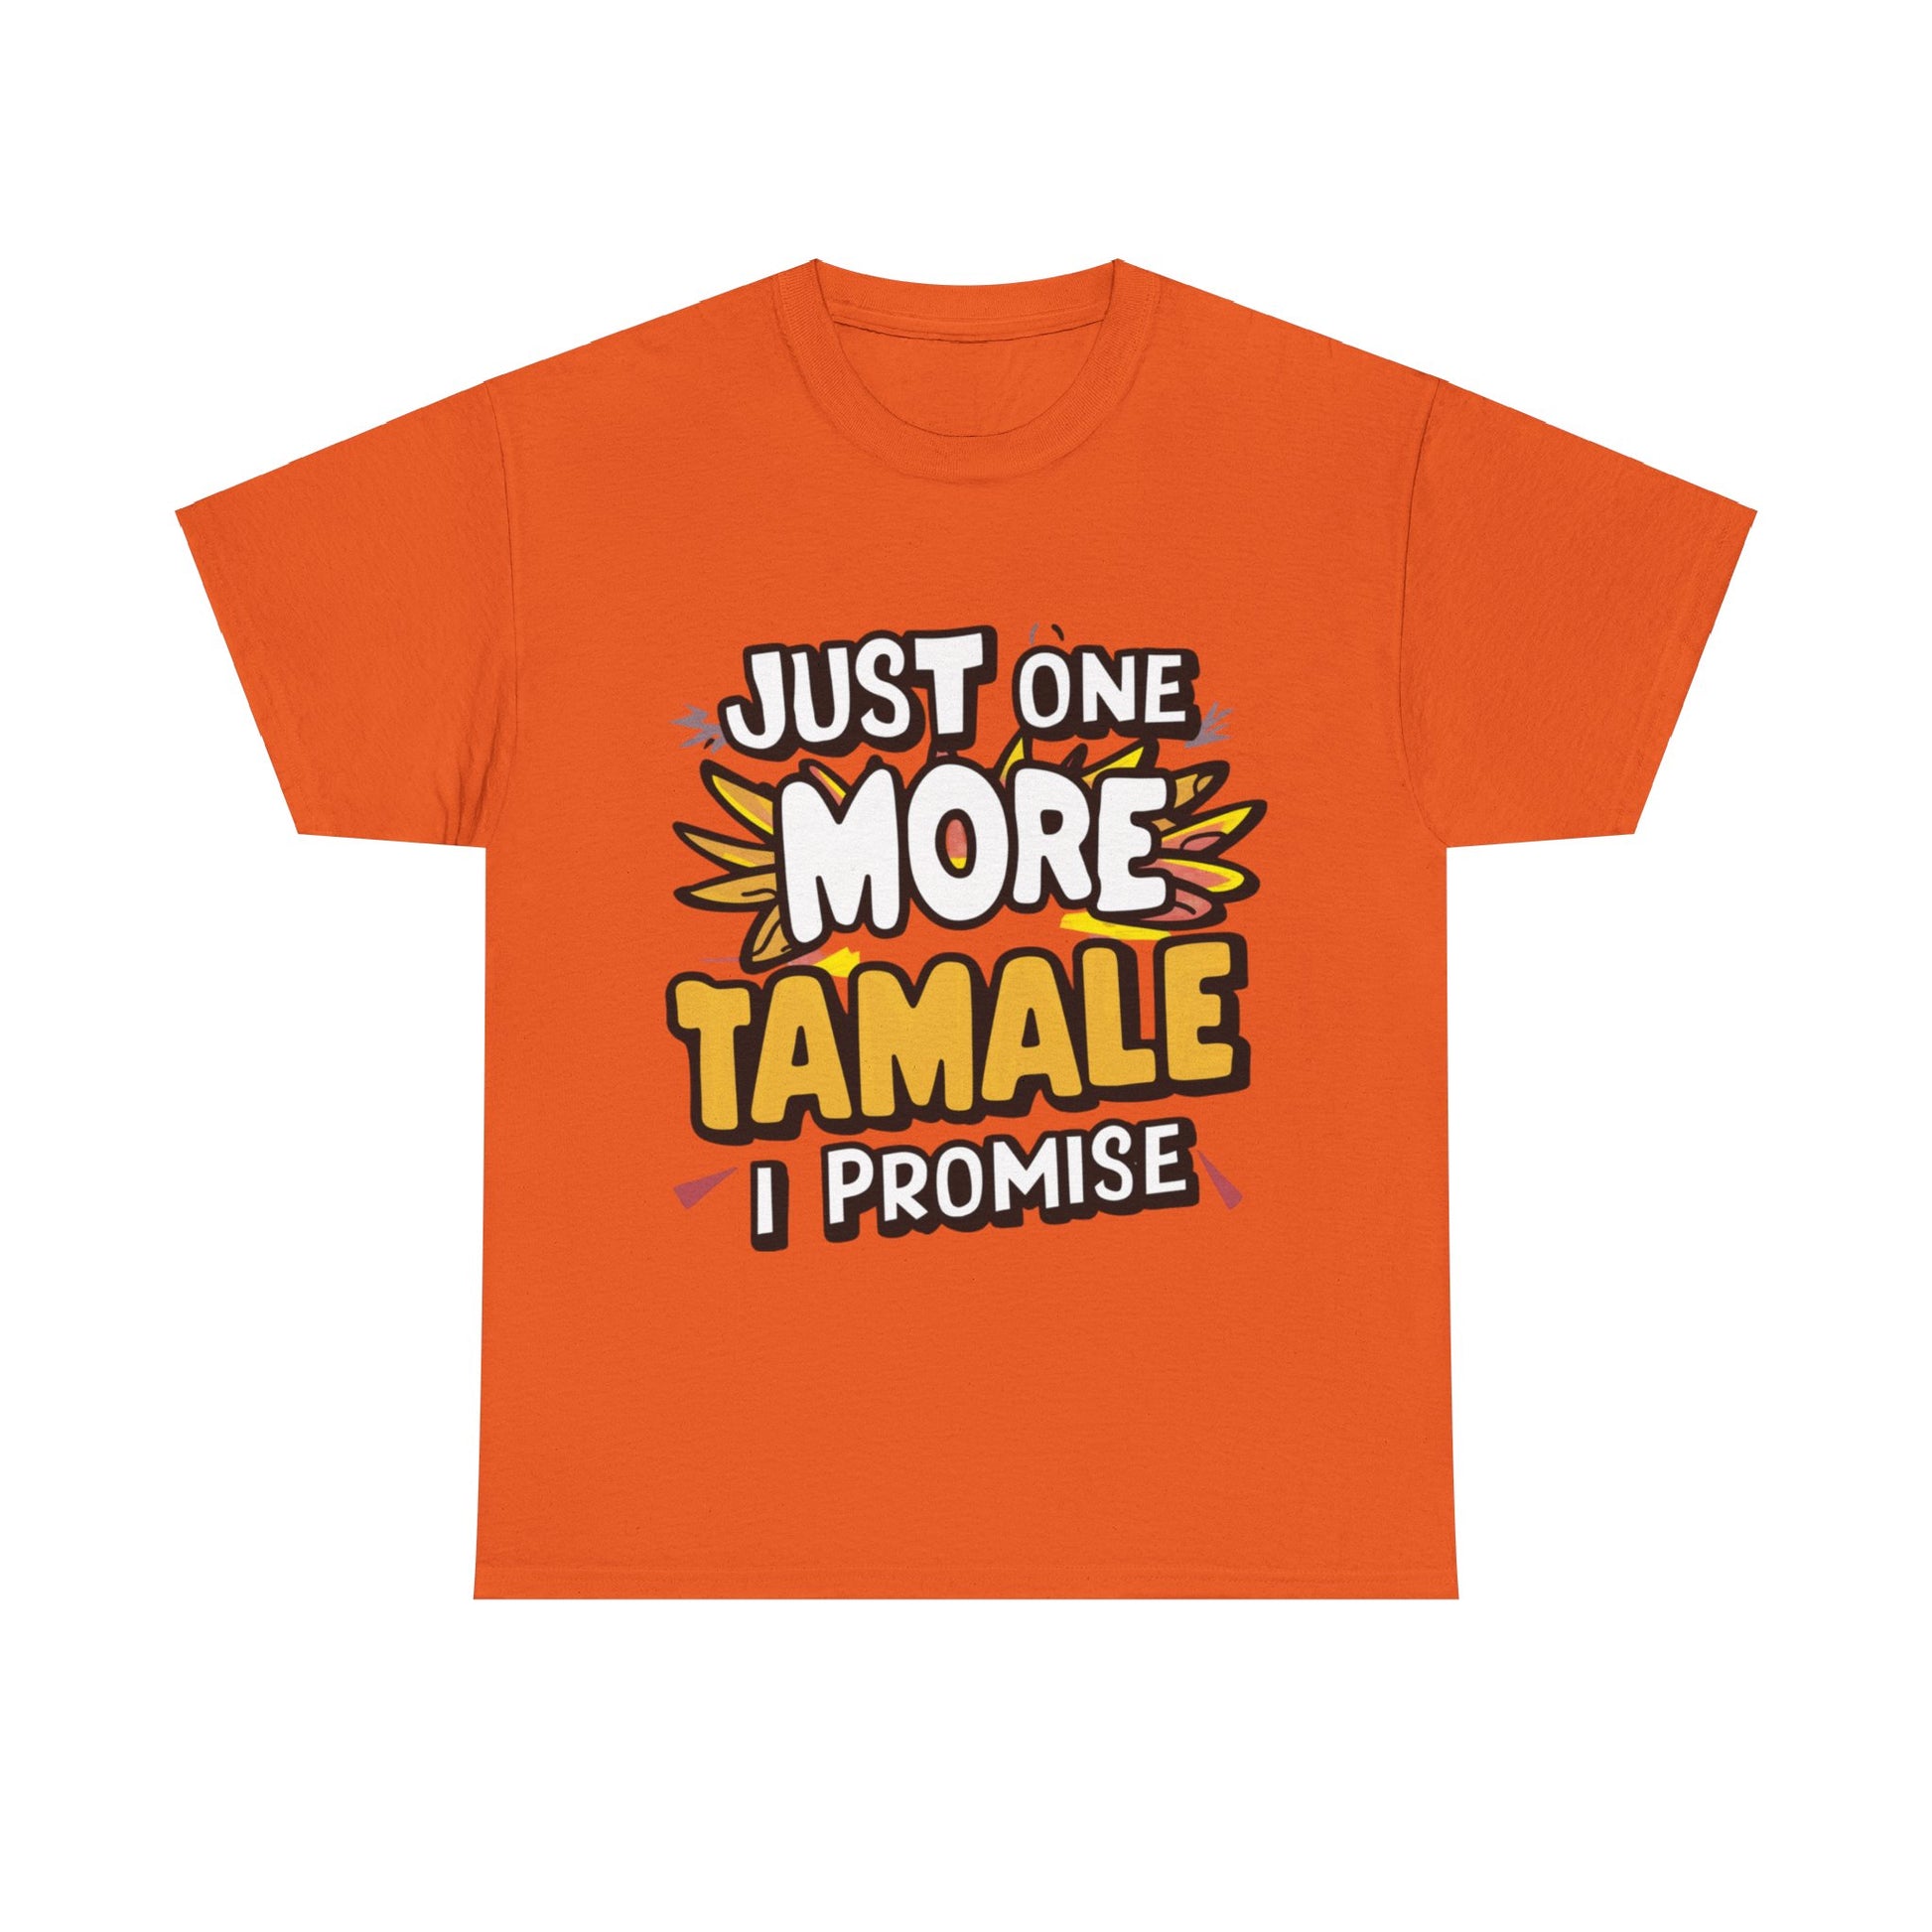 Just One More Tamale I Promise Mexican Food Graphic Unisex Heavy Cotton Tee Cotton Funny Humorous Graphic Soft Premium Unisex Men Women Orange T-shirt Birthday Gift-6